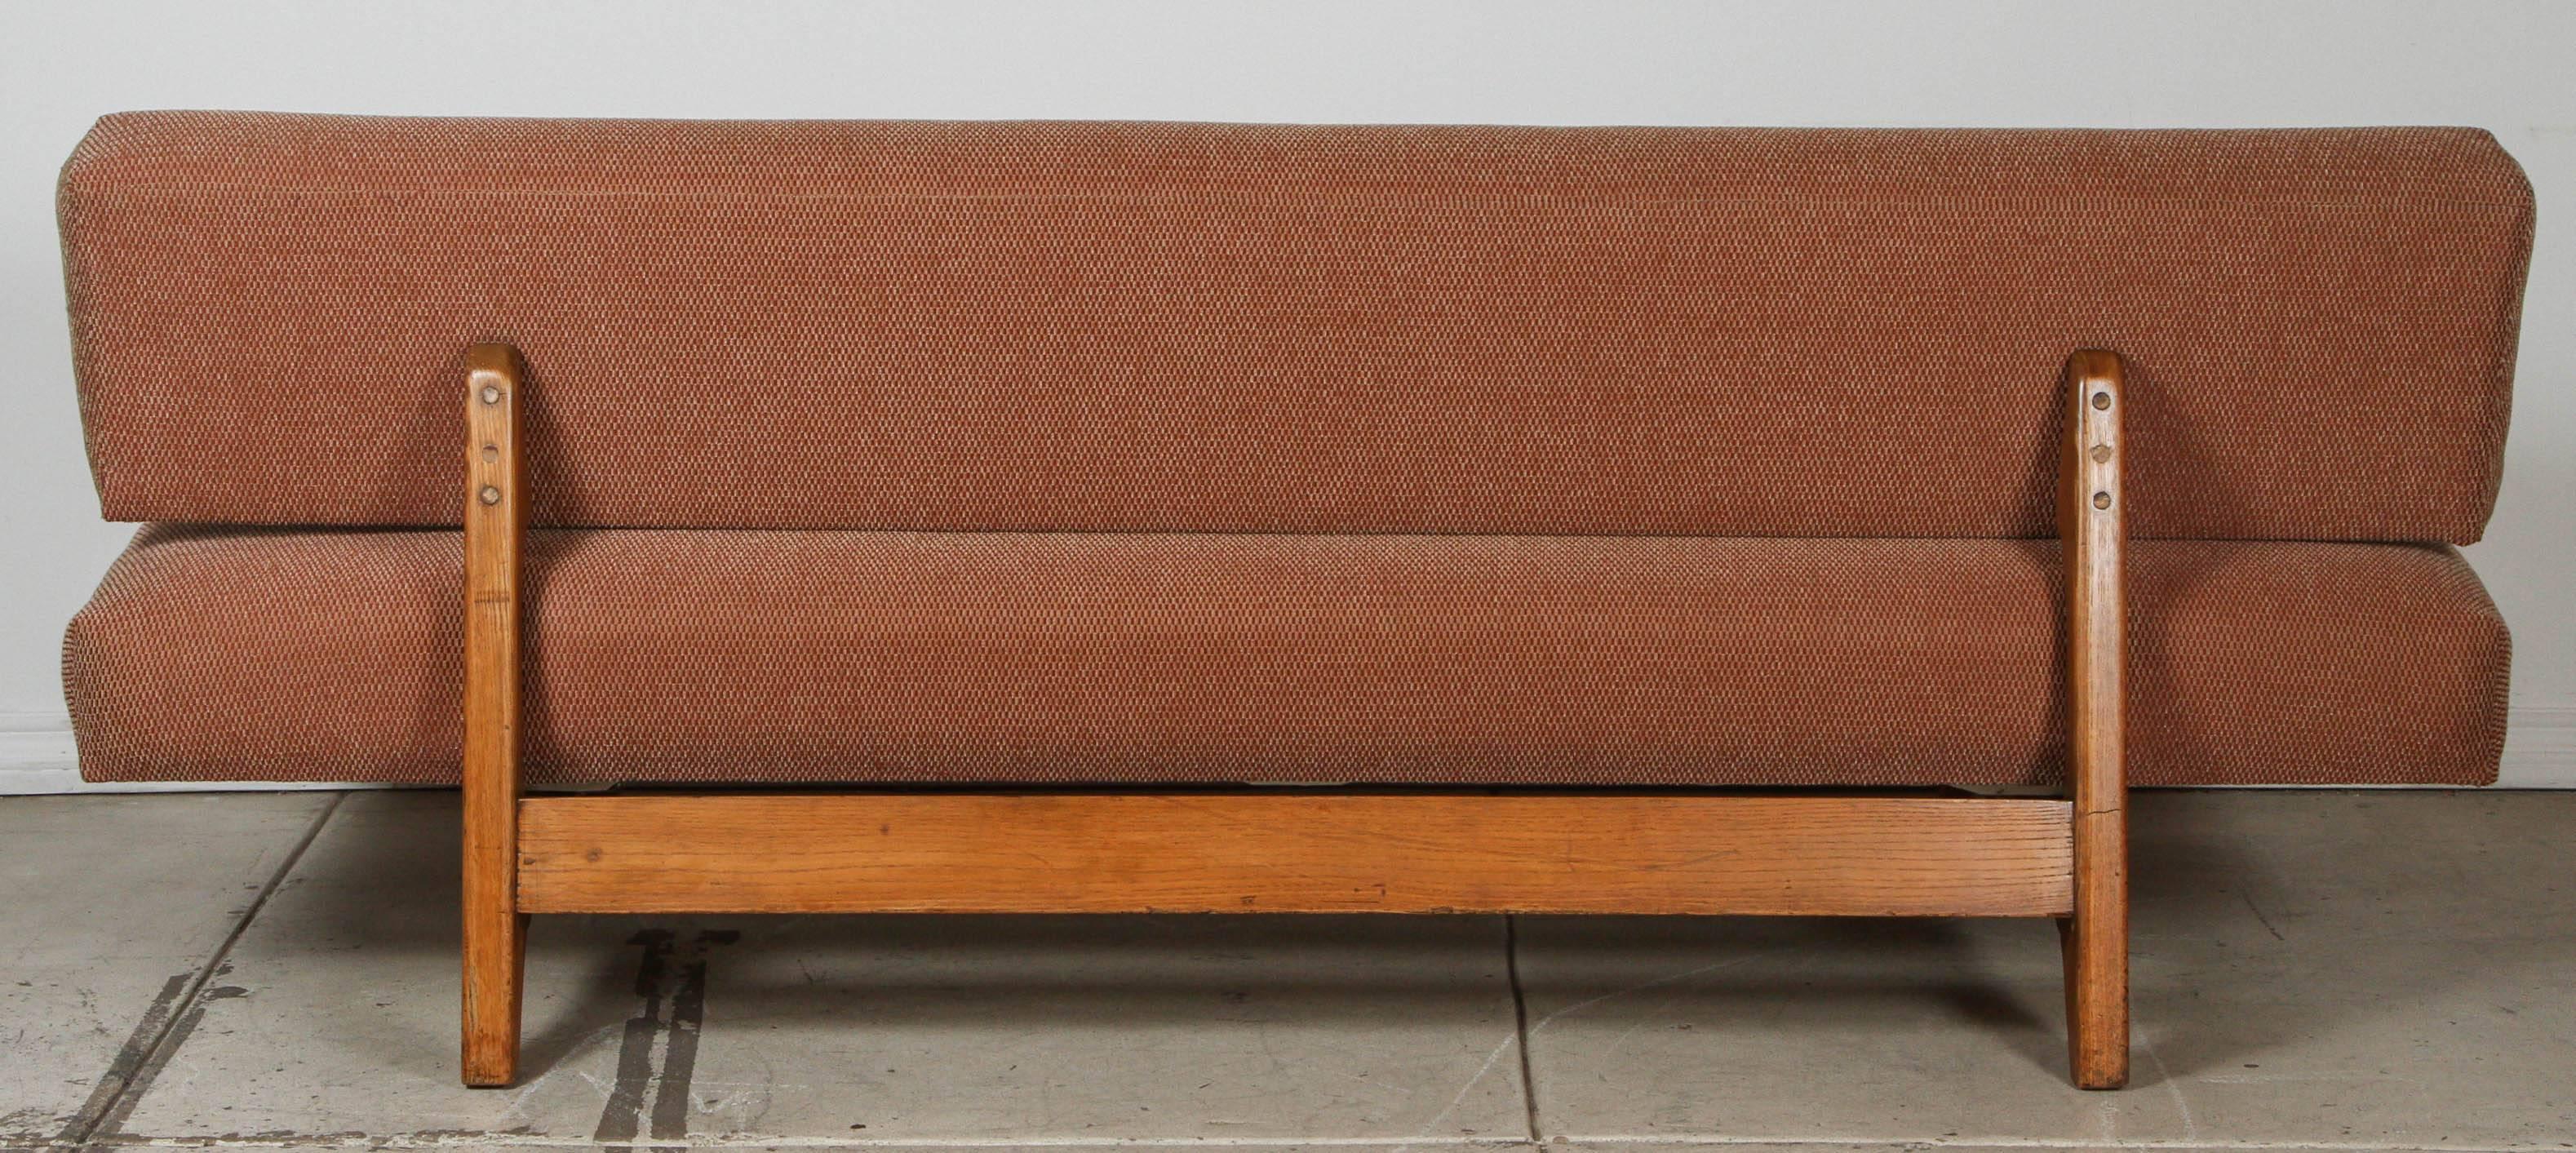 Mid-20th Century California, Dual Position, Articulating Daybed For Sale